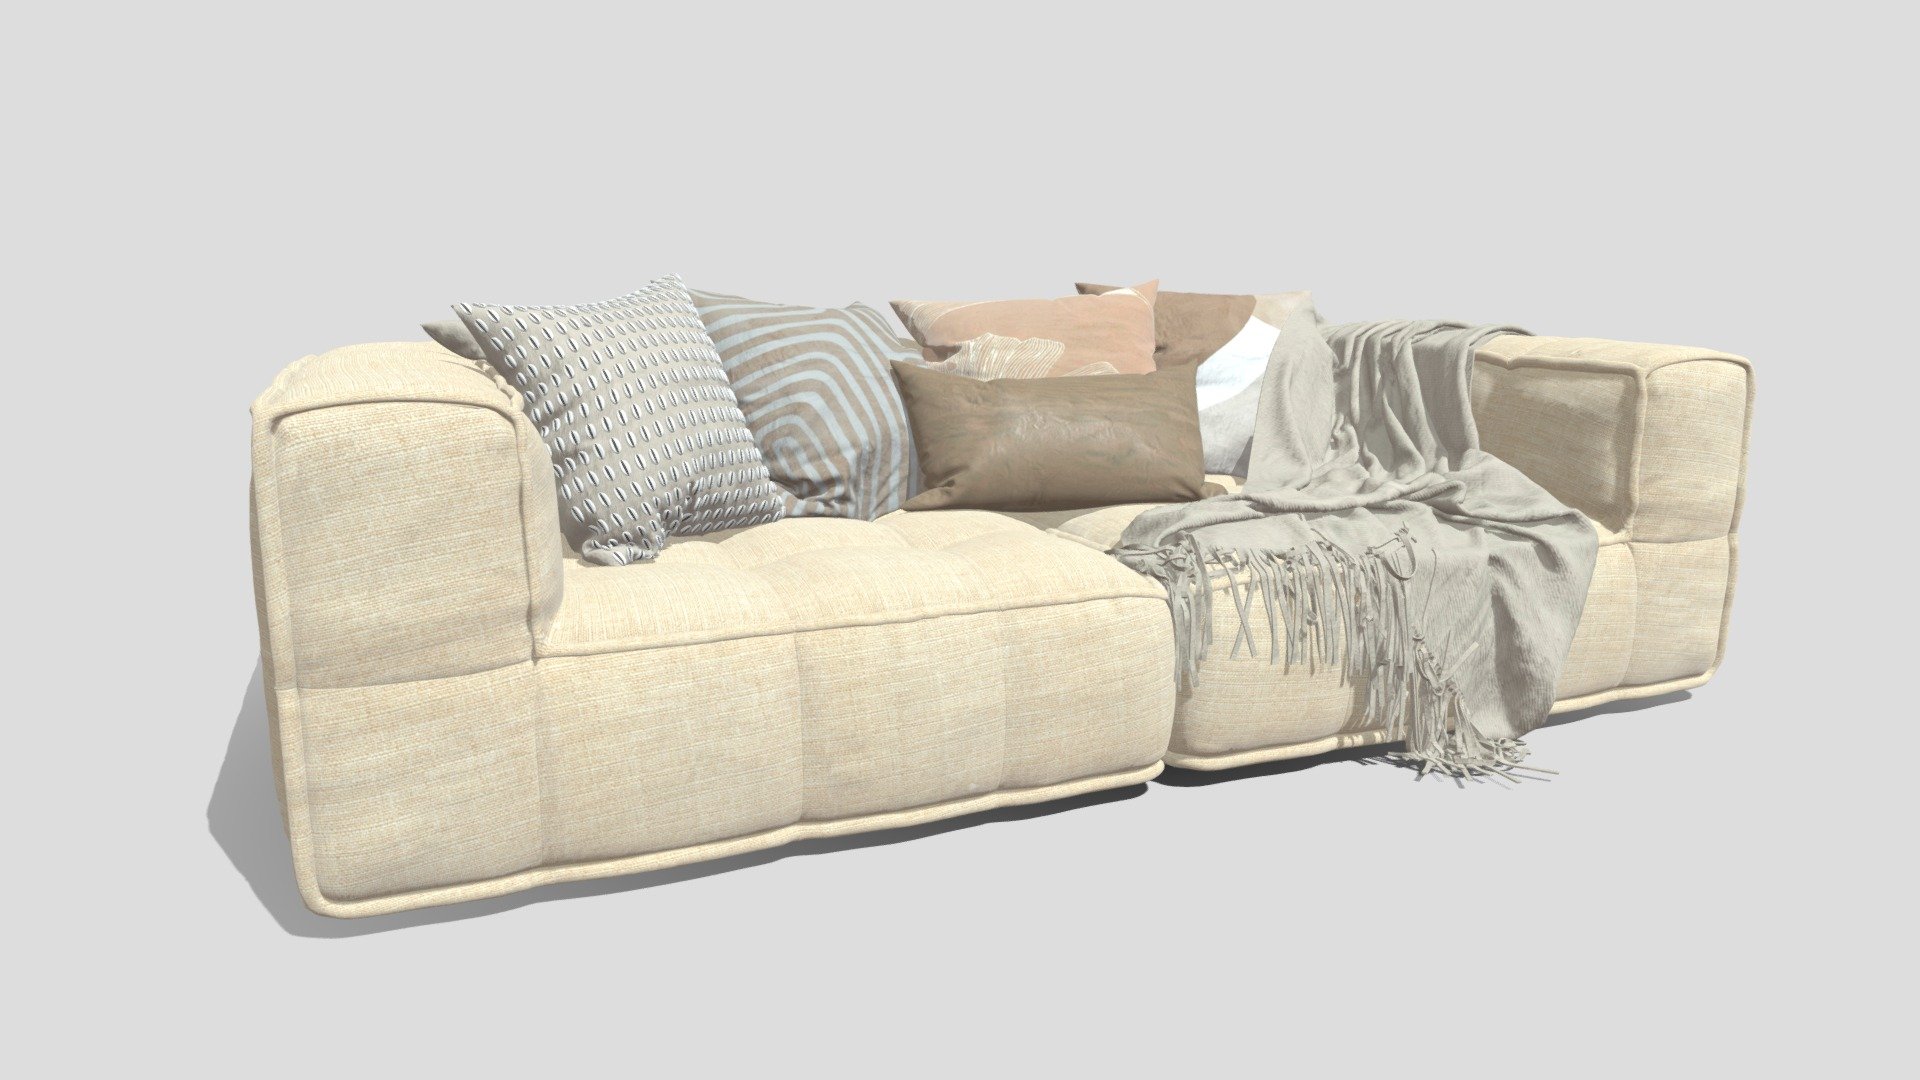 Hi Guys 

Here you can find the amazing Denver Sofa 2 Seat if you are looking for quality this model it's amazing 

high-quality texture, set up for cycles, ready to use in your scene 

Don't waste time take this model and  bring realism into your scene, with just one click

Denver Sofa
Uniqwa
Color: Natural

Size:
W 125cm | D 125cm | H 65cm
W 500cm | D 375cm

Poly Count: 345208
Vertices: 346930
Unwrap UVW

The file consists of:

• blend file format

• renders

• textures

Don't look further take this model and make your scene amazing

We are collaborating with Alex. to bring new amazing models in Blender format 

I hope this will help you to make beautiful works - Denver Sofa 2 Seat - 3D model by Uka Studio (@uka.studio) 3d model